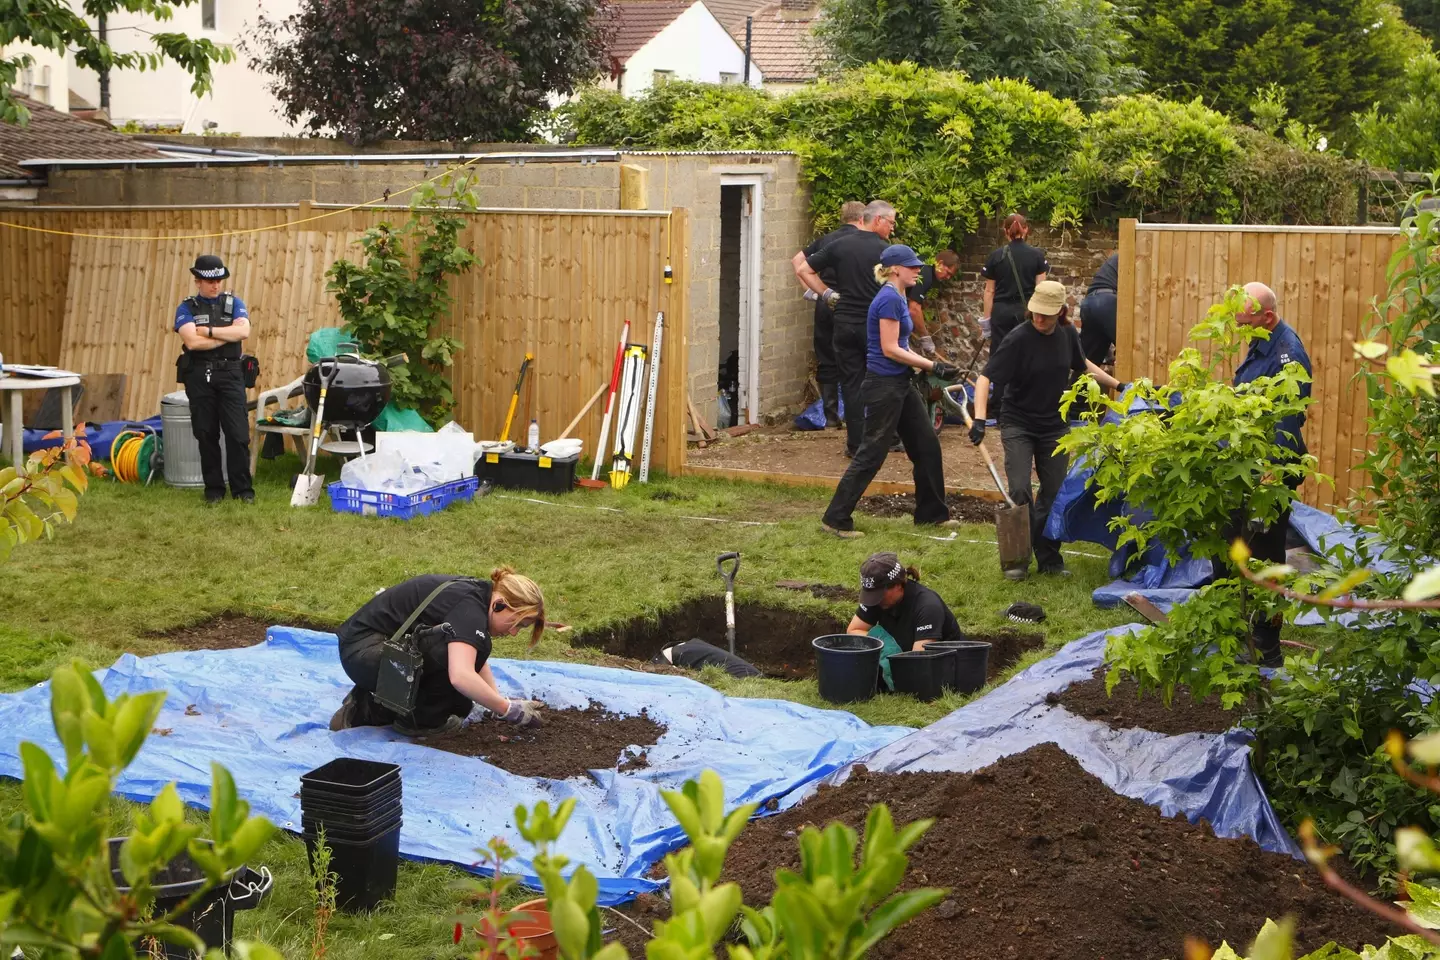 Officers from Sussex Police search the garden of a house in Station Road, Portslade, where Peter Tobin also once lived.